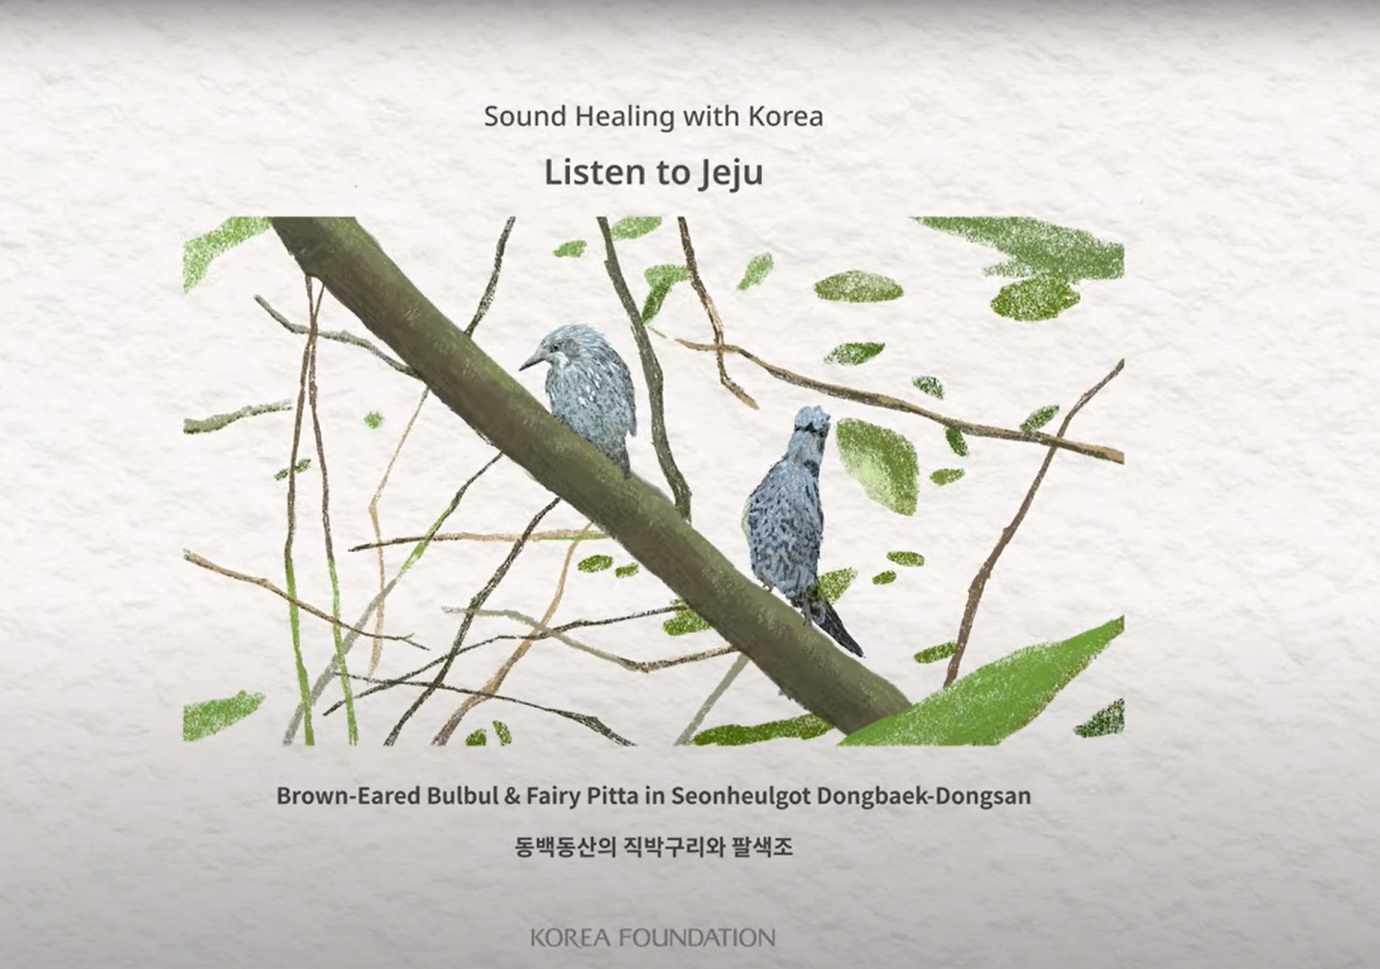 [ASMR] 2021 Sound Healing with Korea - Listen to <font color='red'>Jeju</font> | 1. Brown-Eared Bulbul & Fairy Pitta